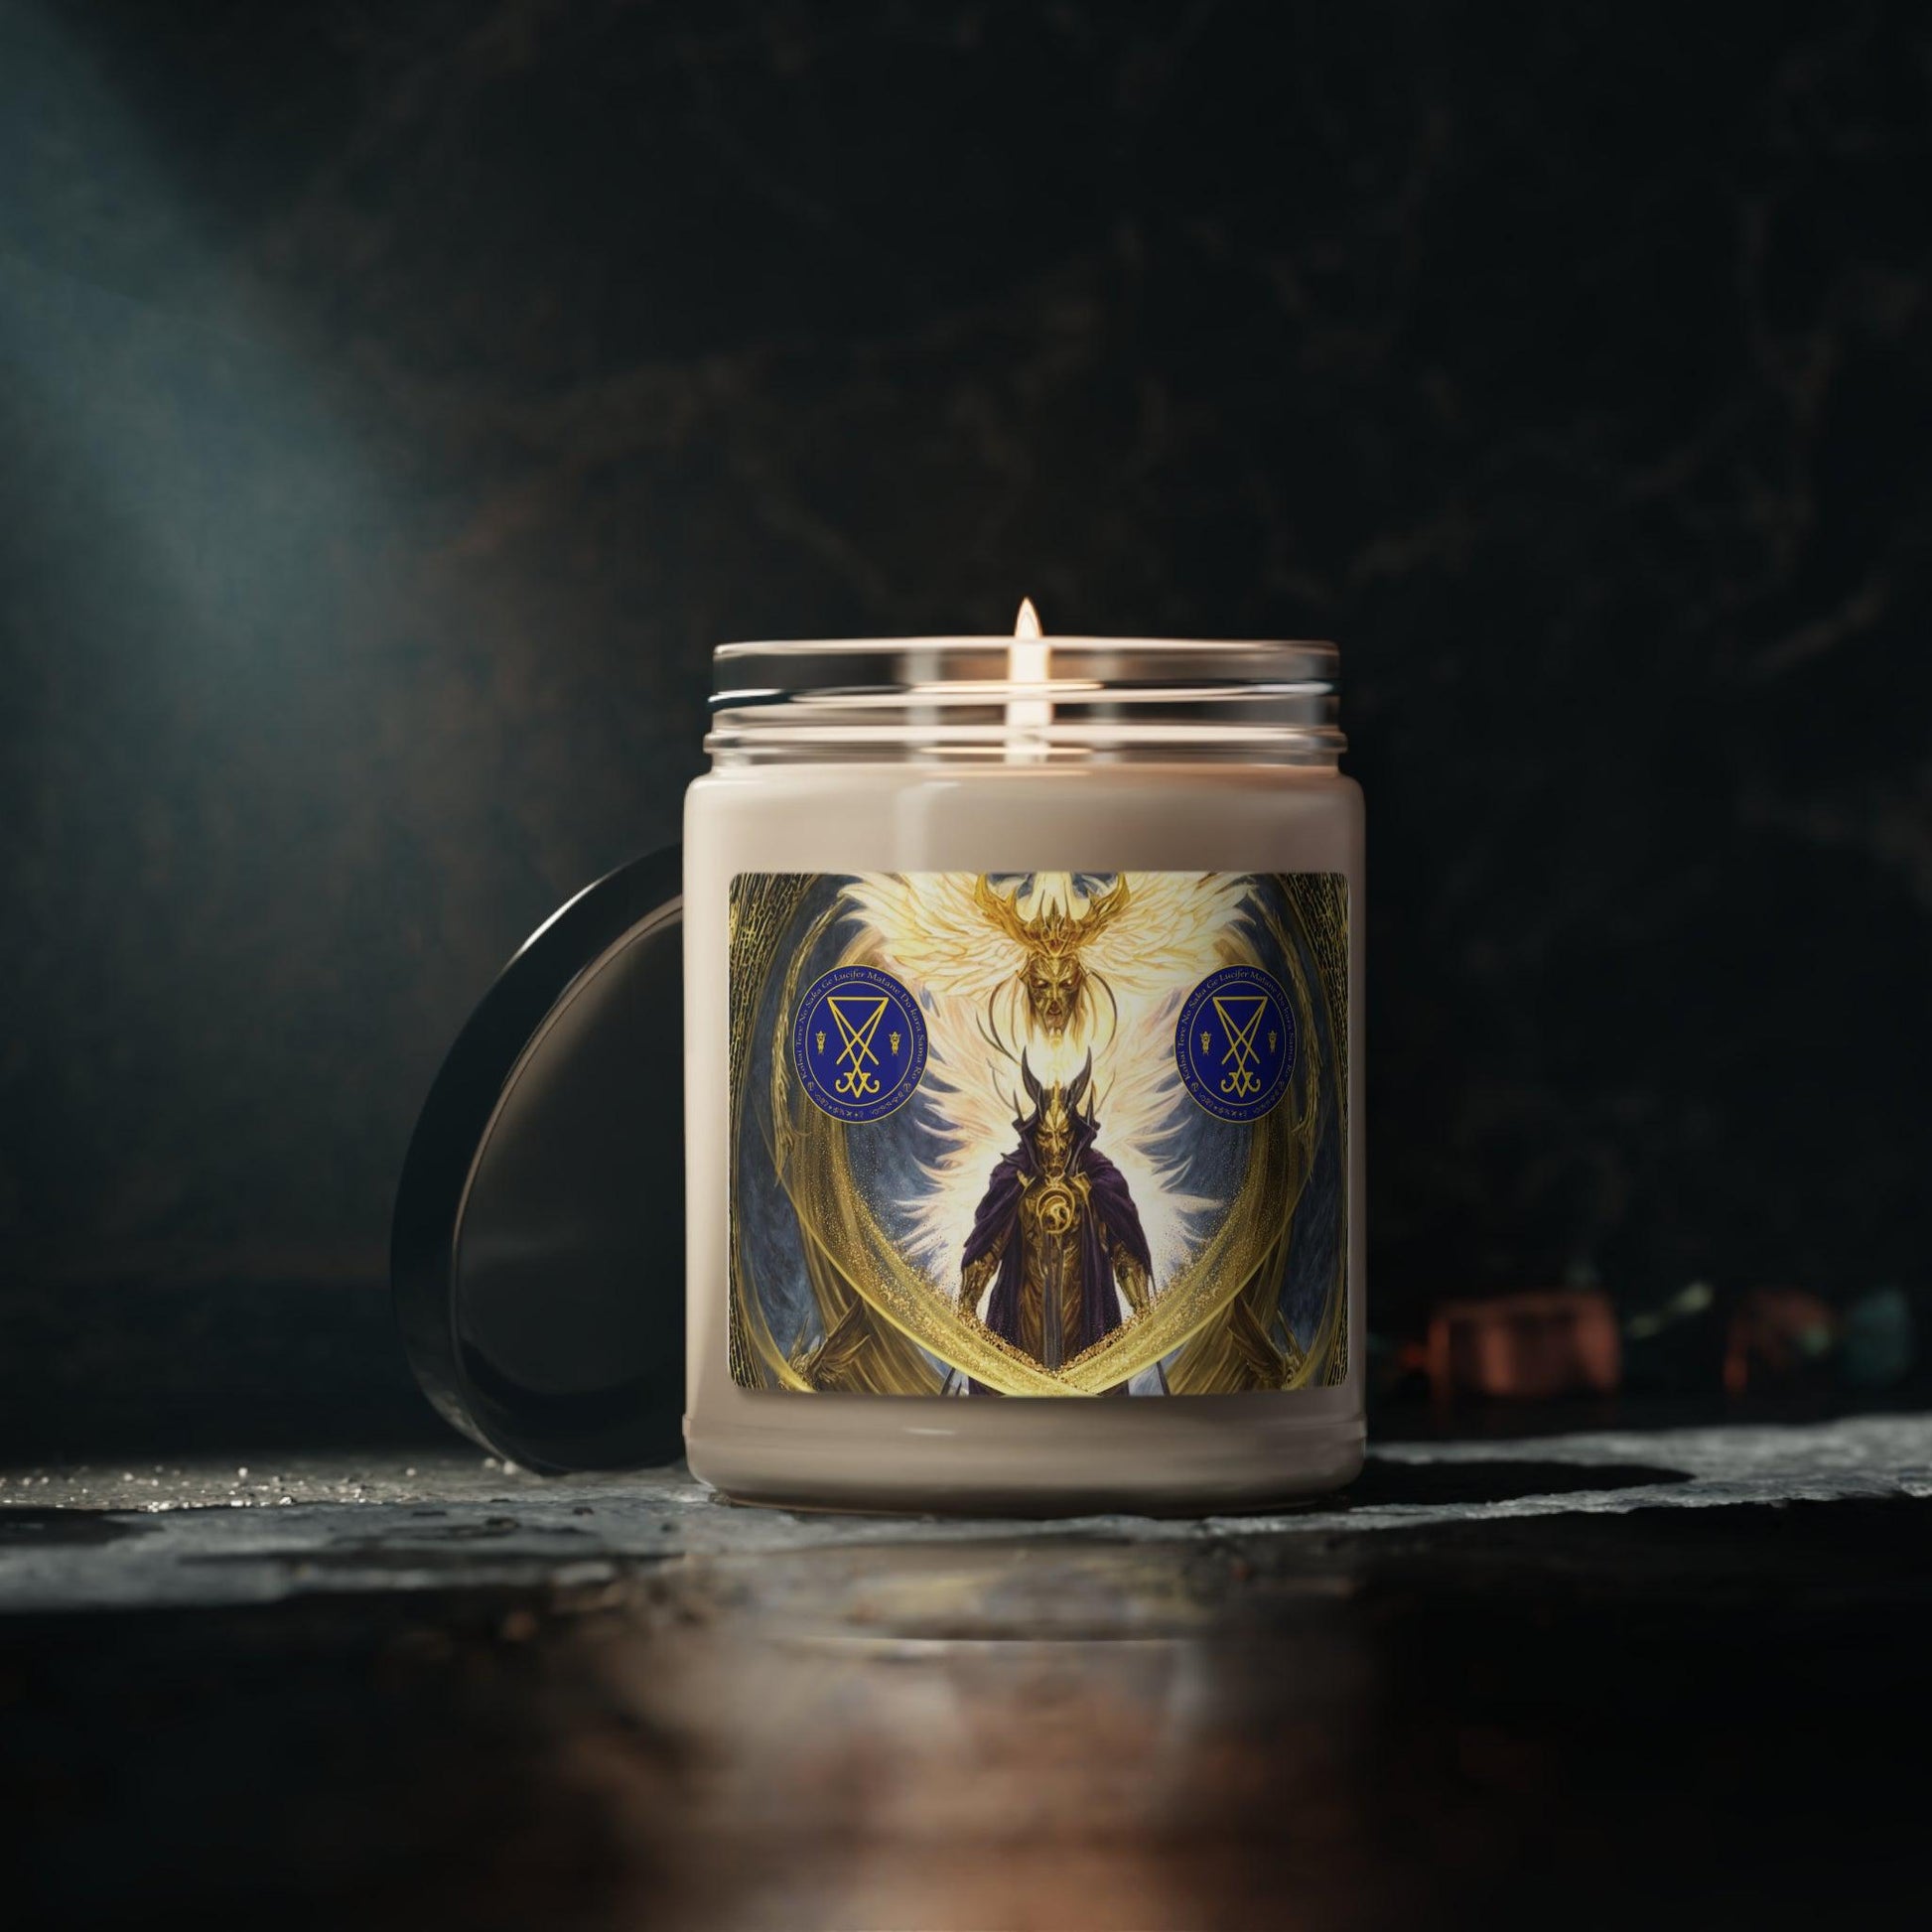 Demon-Lucifer-Scented-Soy-Candle-for-Altar-offerings-rituals-initiations-or-praying-and-meditation-10